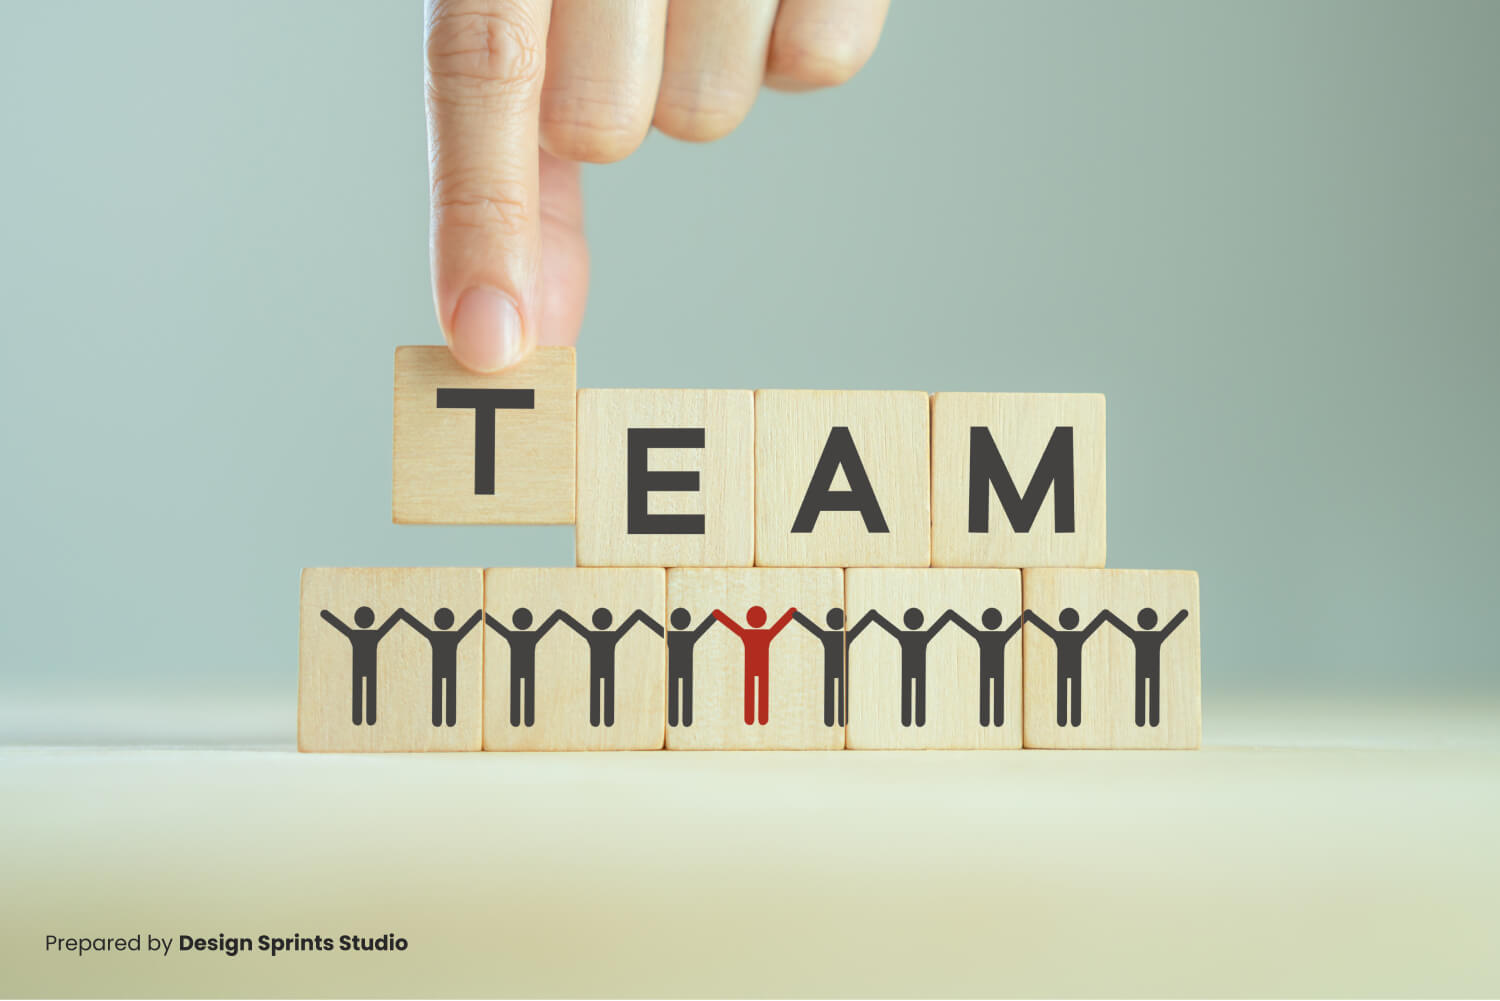 How to Work Together as a Team